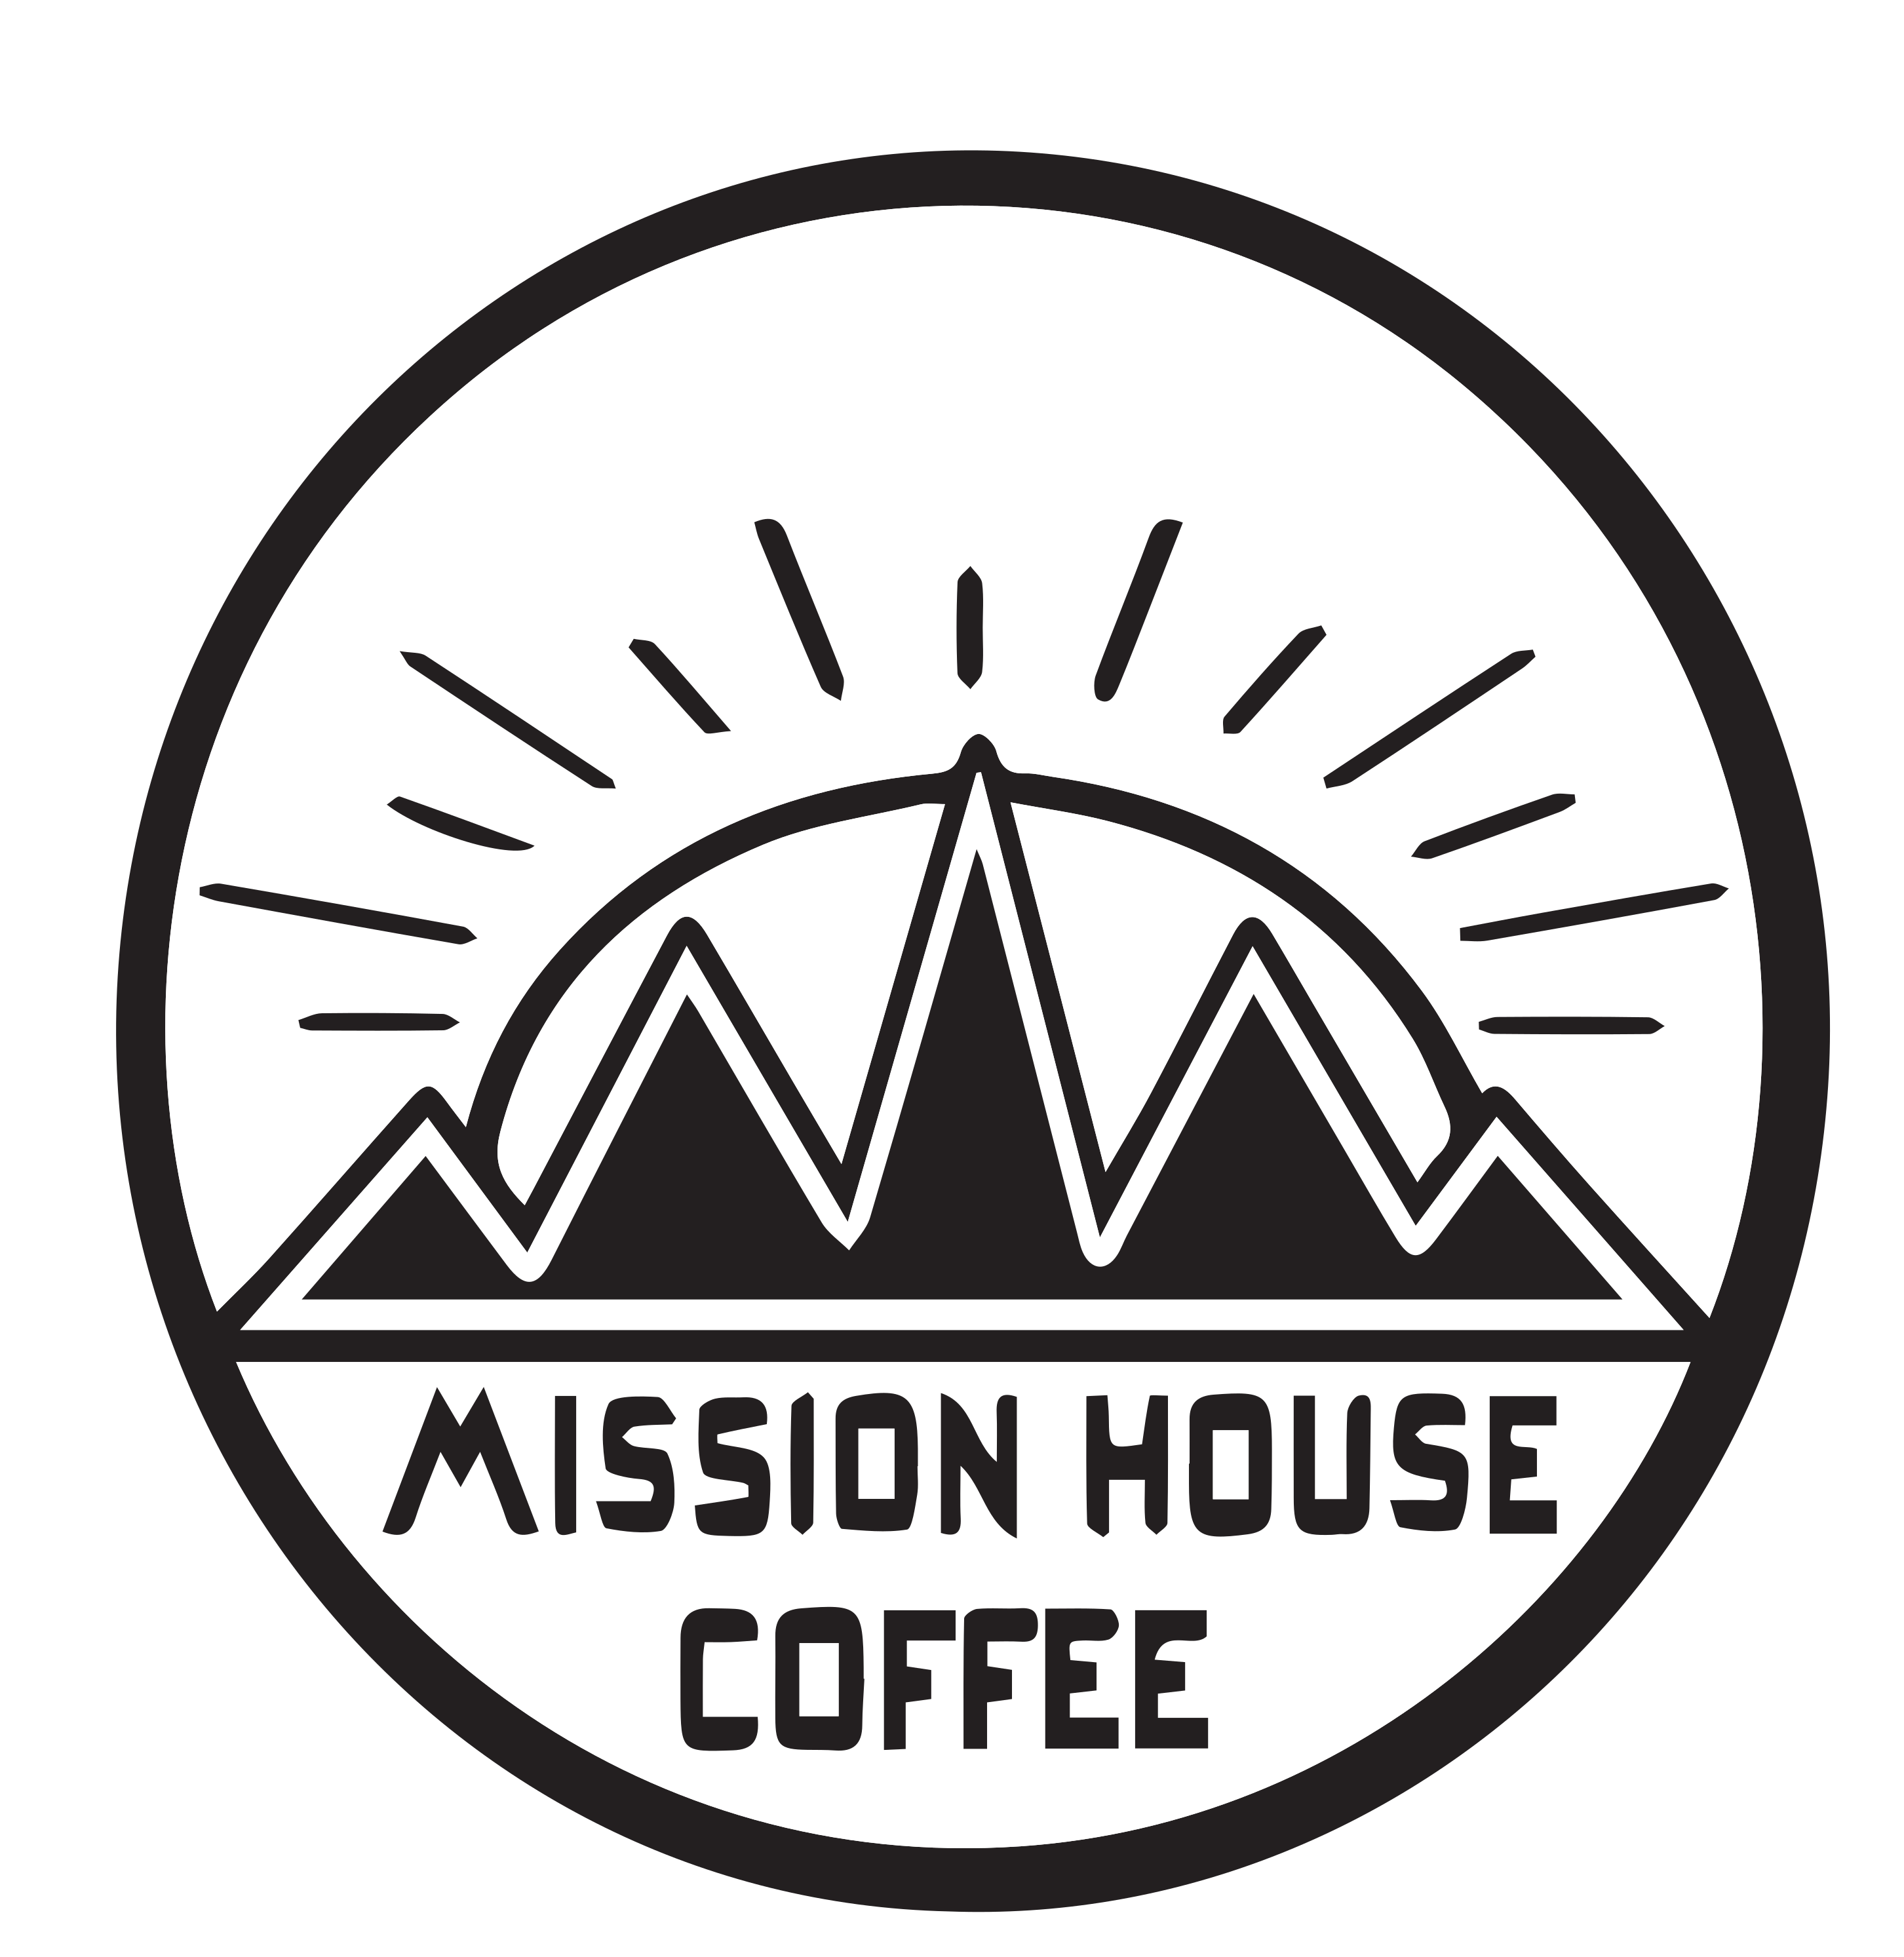 Mission House Coffee - Commerce St 722 Commerce St